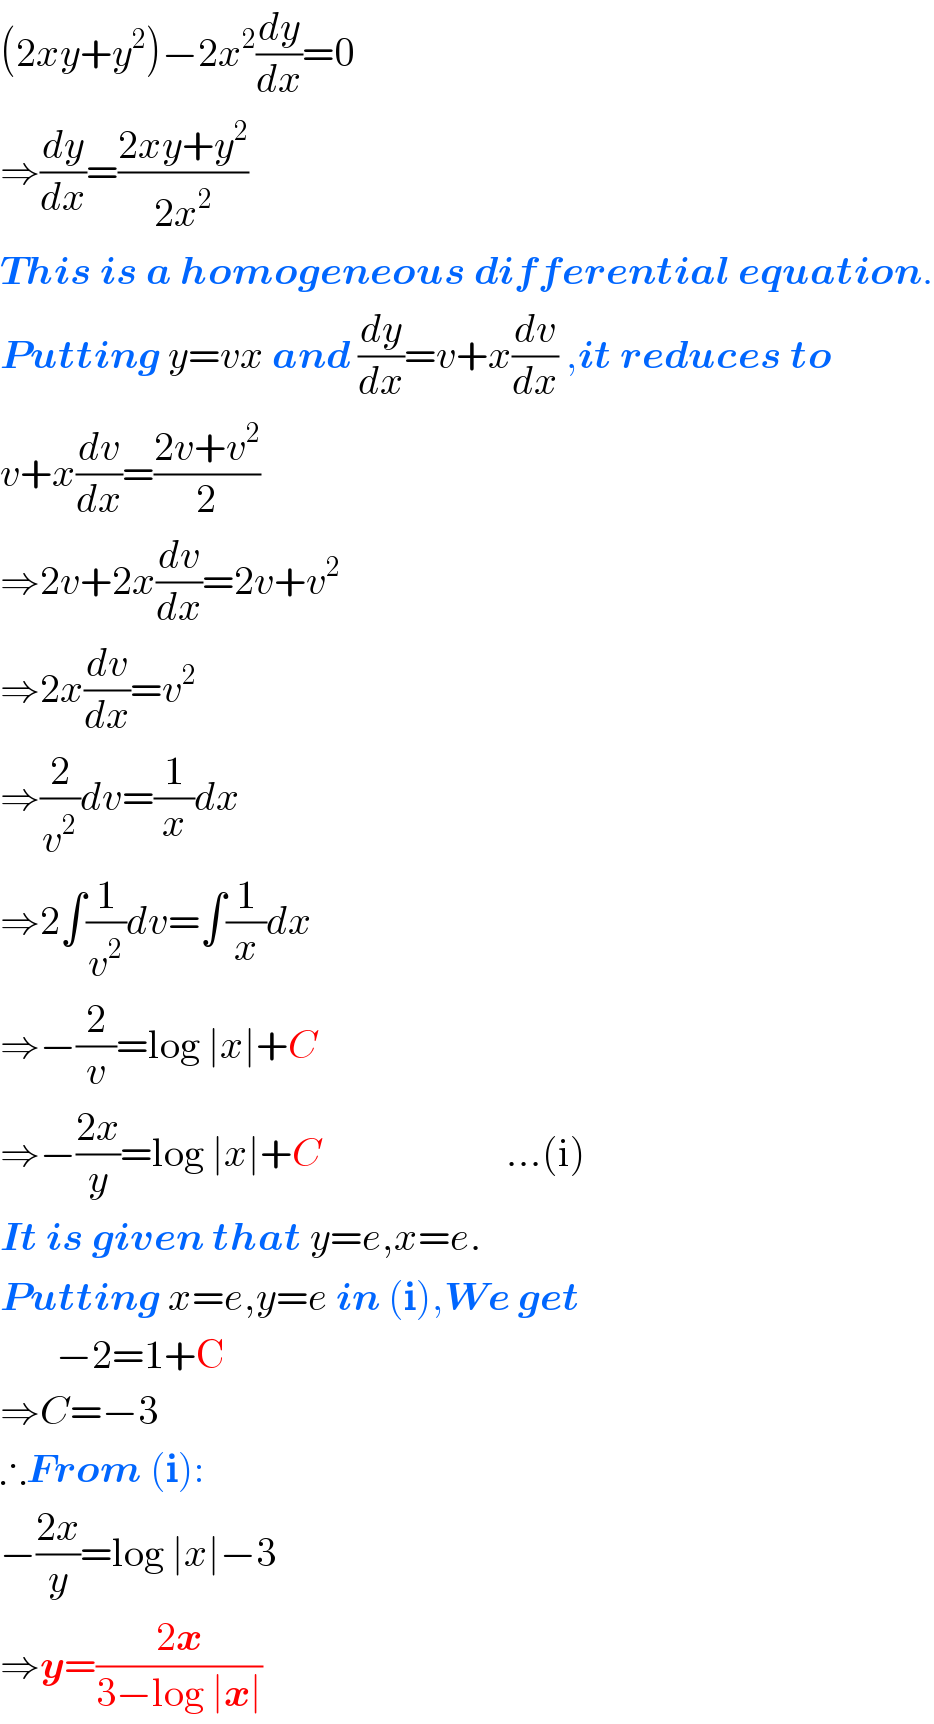 (2xy+y^2 )−2x^2 (dy/dx)=0  ⇒(dy/dx)=((2xy+y^2 )/(2x^2 ))  This is a homogeneous differential equation.  Putting y=vx and (dy/dx)=v+x(dv/dx) ,it reduces to  v+x(dv/dx)=((2v+v^2 )/2)  ⇒2v+2x(dv/dx)=2v+v^2   ⇒2x(dv/dx)=v^2   ⇒(2/v^2 )dv=(1/x)dx  ⇒2∫(1/v^2 )dv=∫(1/x)dx  ⇒−(2/v)=log ∣x∣+C                              ⇒−((2x)/y)=log ∣x∣+C                       ...(i)  It is given that y=e,x=e.  Putting x=e,y=e in (i),We get         −2=1+C  ⇒C=−3  ∴From (i):  −((2x)/y)=log ∣x∣−3  ⇒y=((2x)/(3−log ∣x∣))  